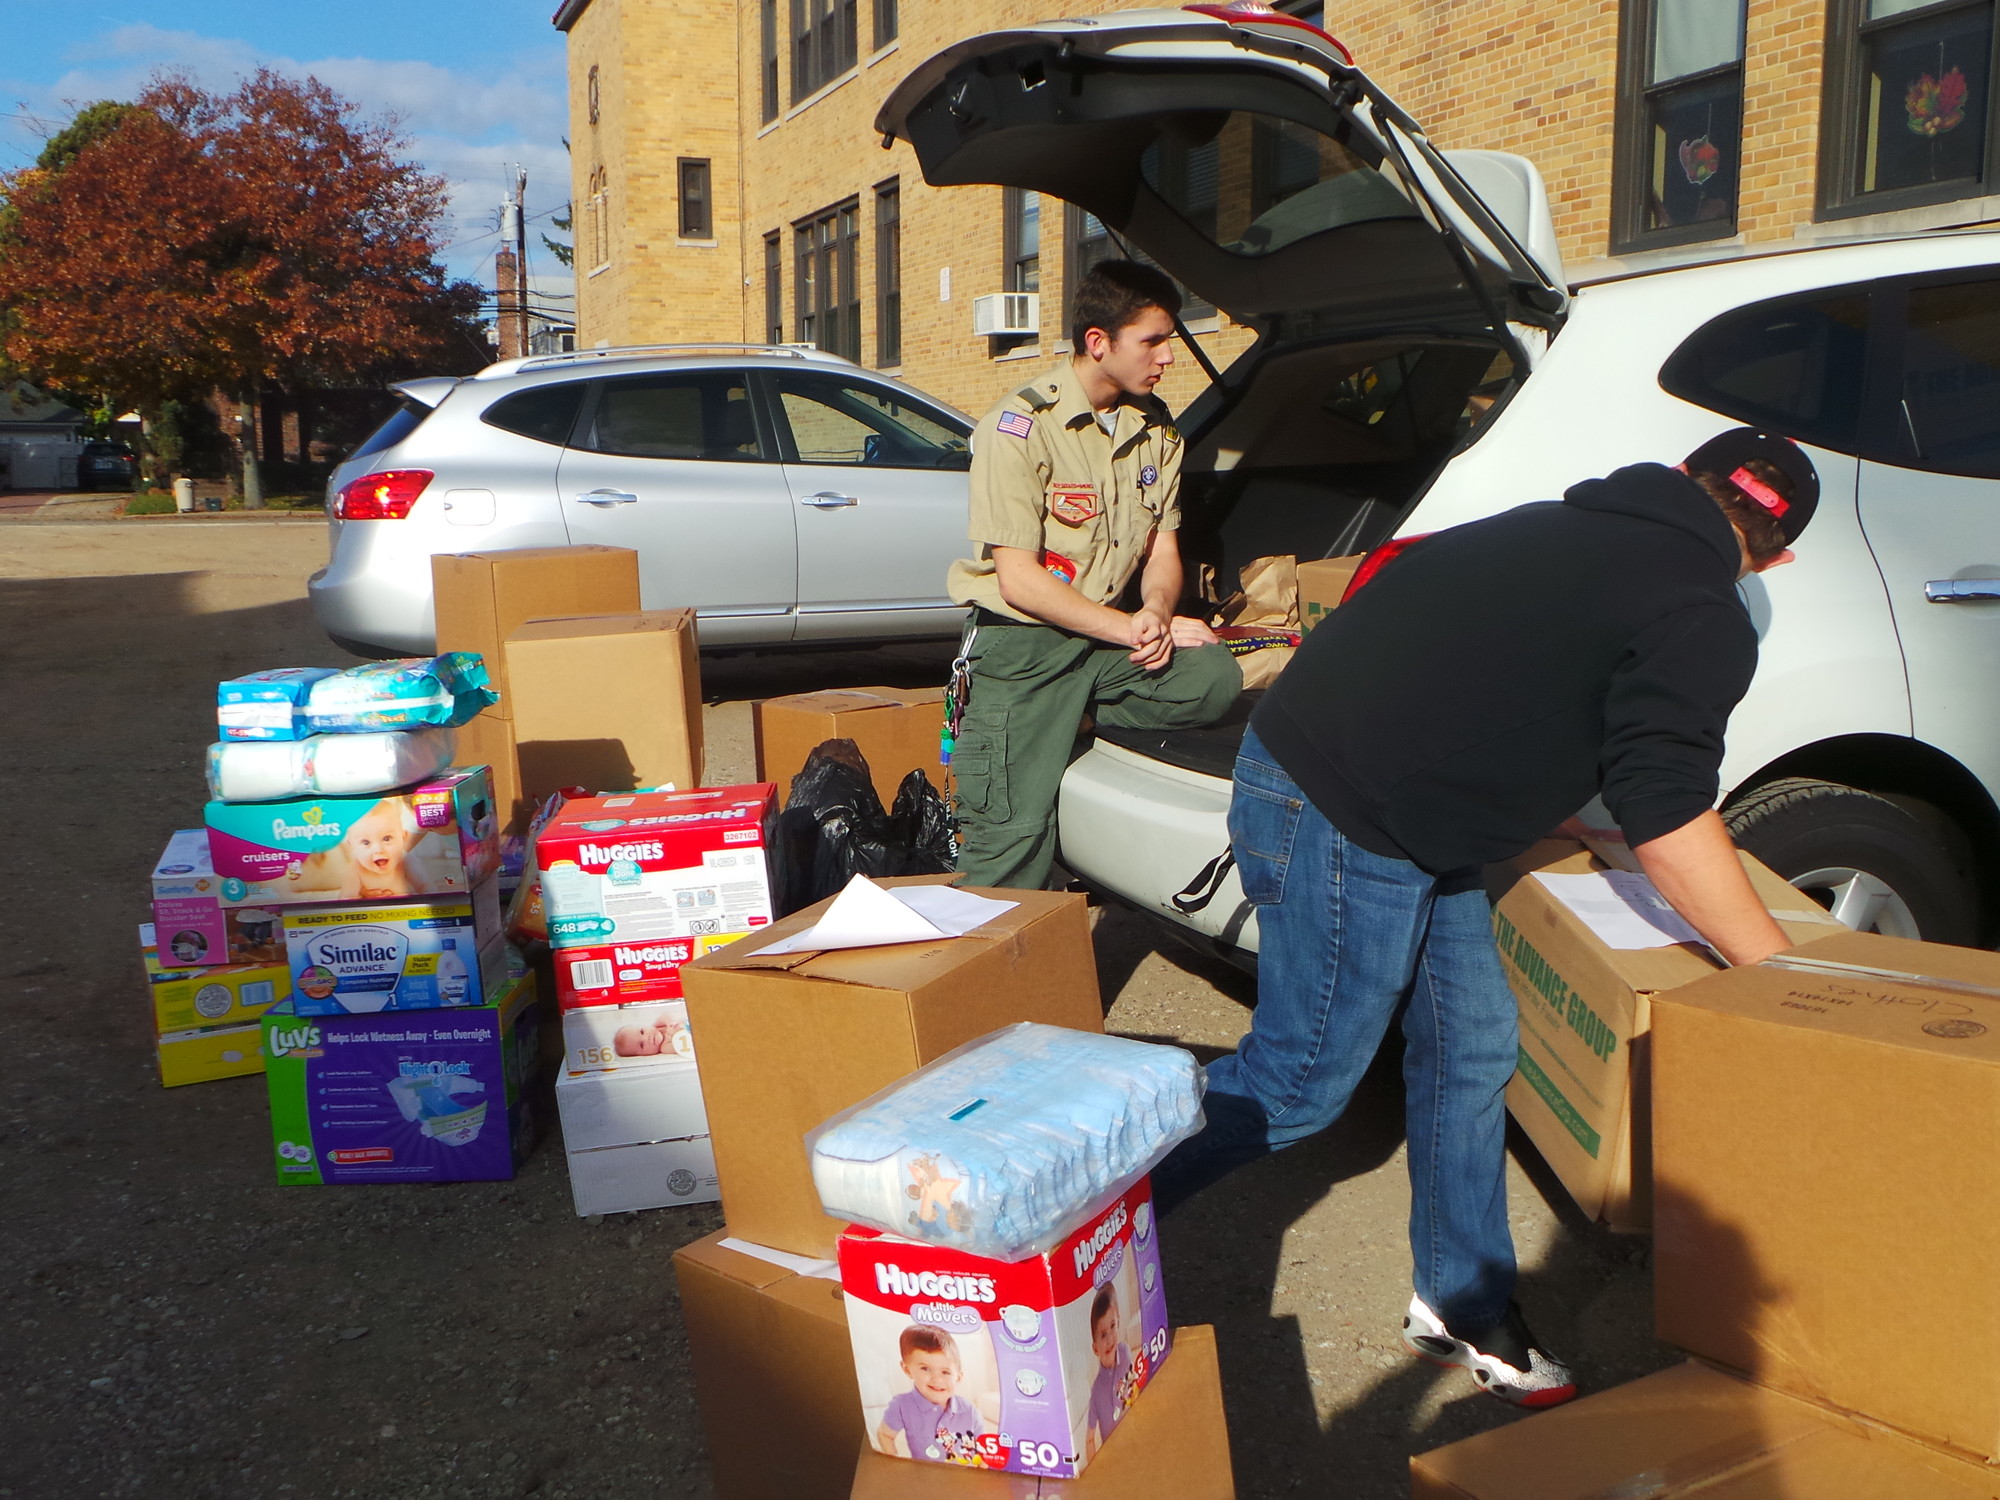 Brendan Warner, an Eagle Scout candidate in Troop 24 in Malverne, left, packs a car full of donations destined for the Haven House, a homeless shelter in Brentwood.